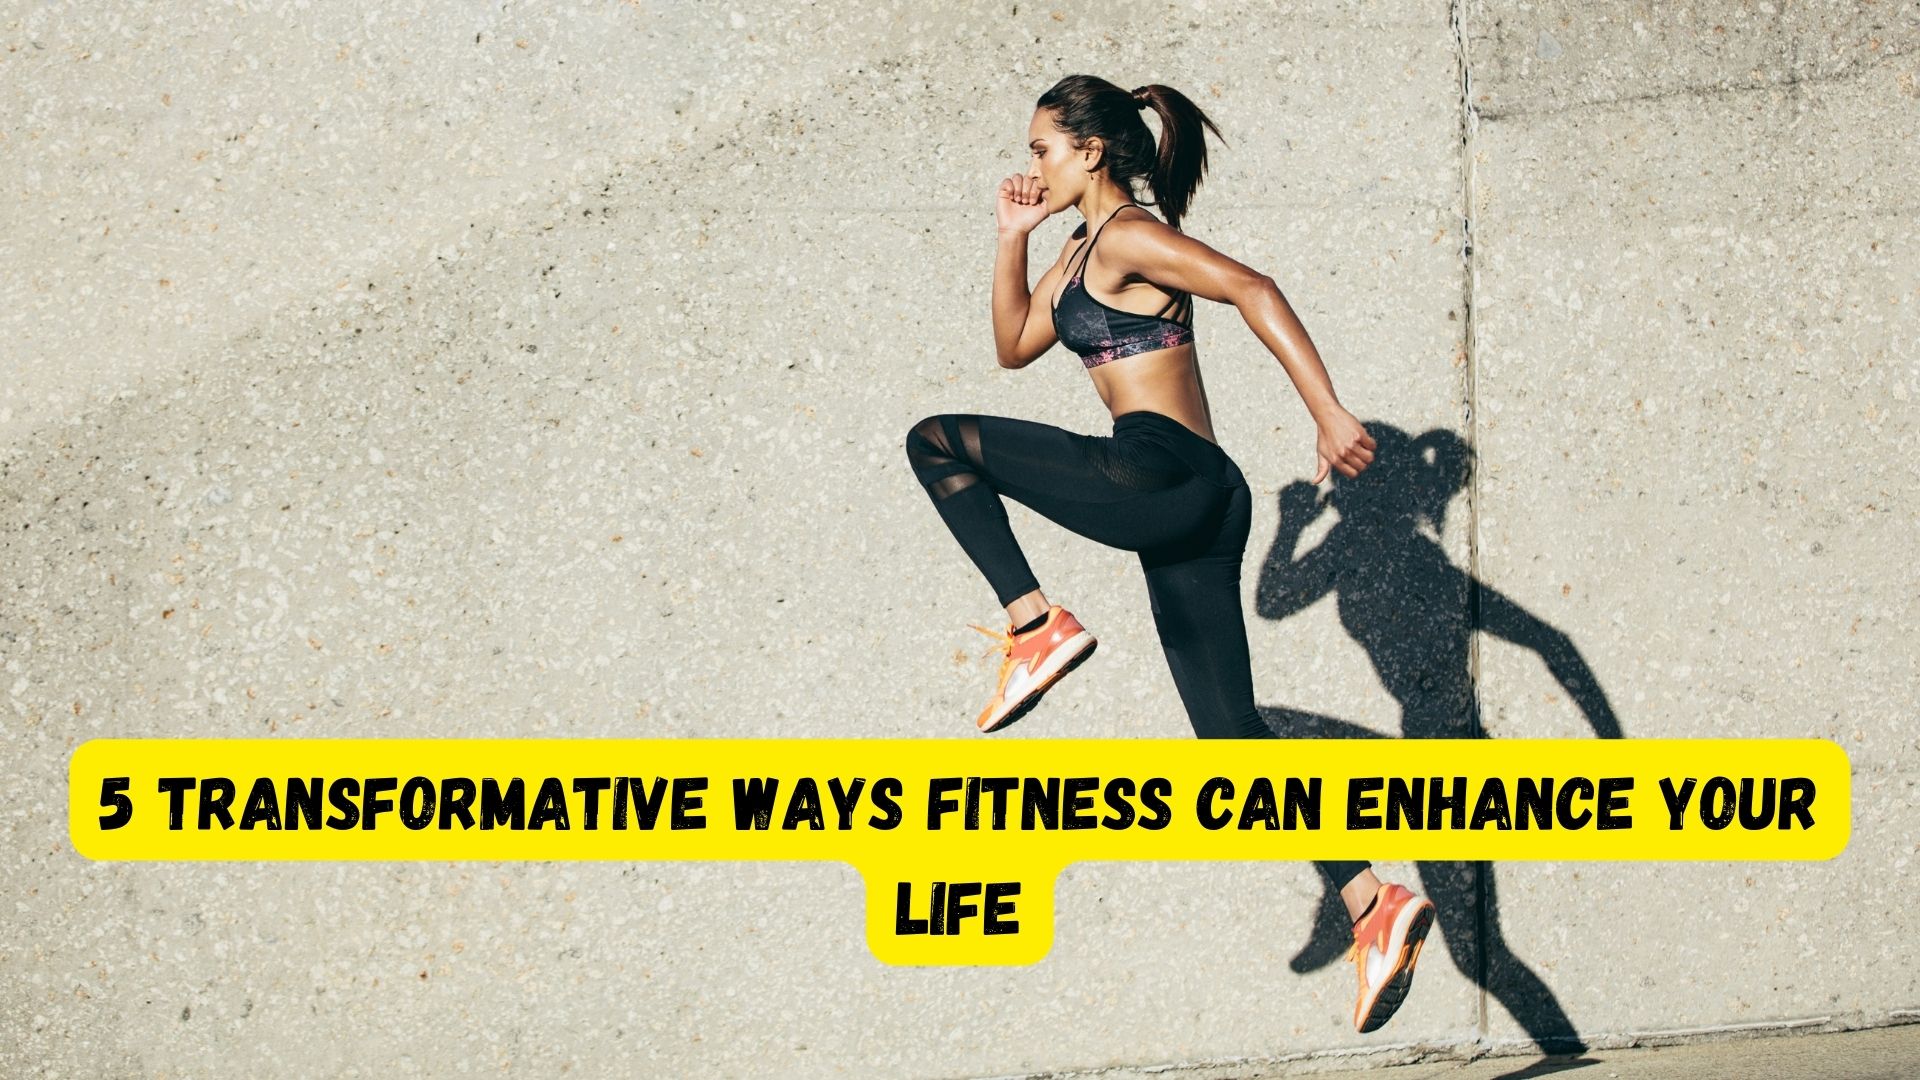 5 Transformative Ways Fitness Can Enhance Your Life